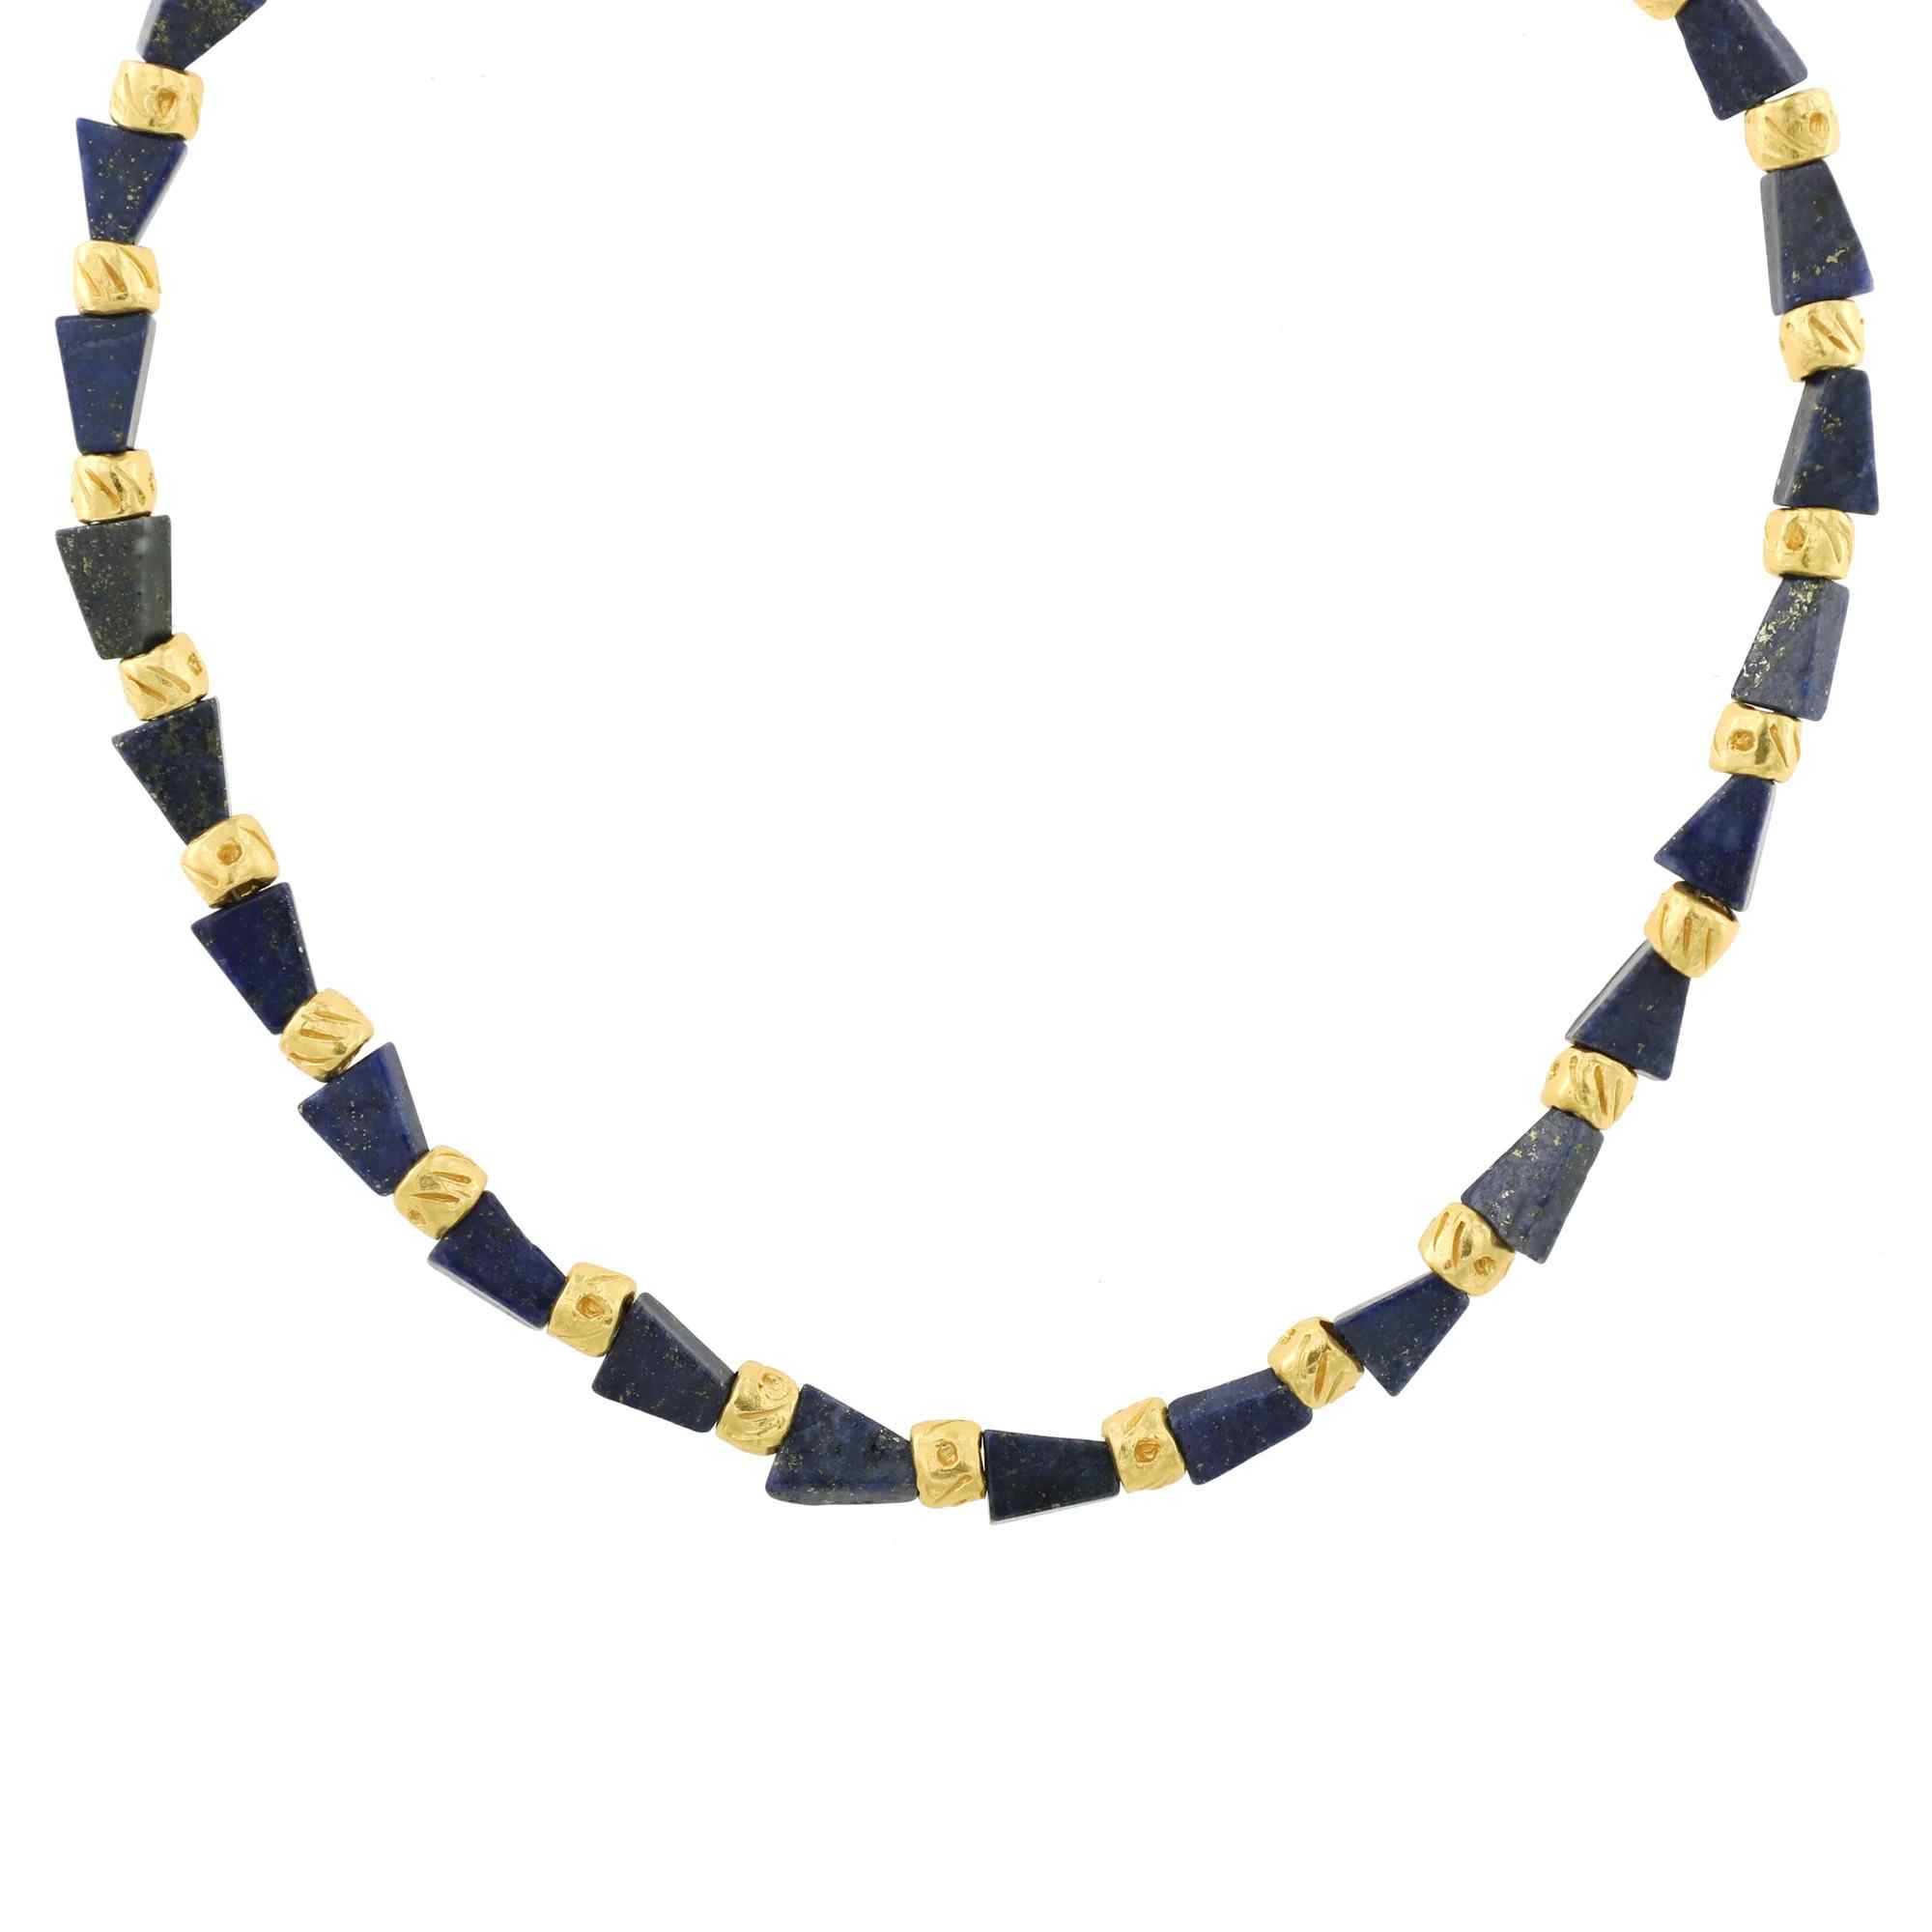 CO.NK.118 Necklace – 18K Gold Plated